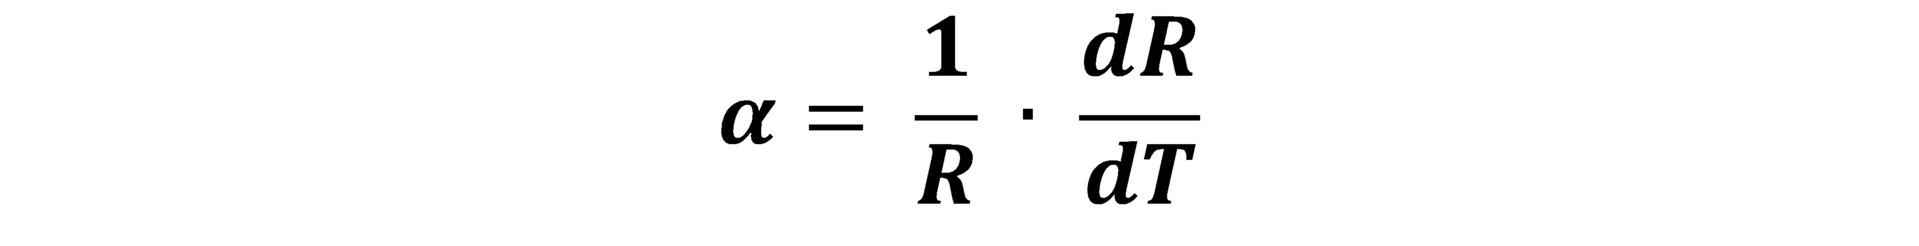 Equation for the alpha of a thermistor.